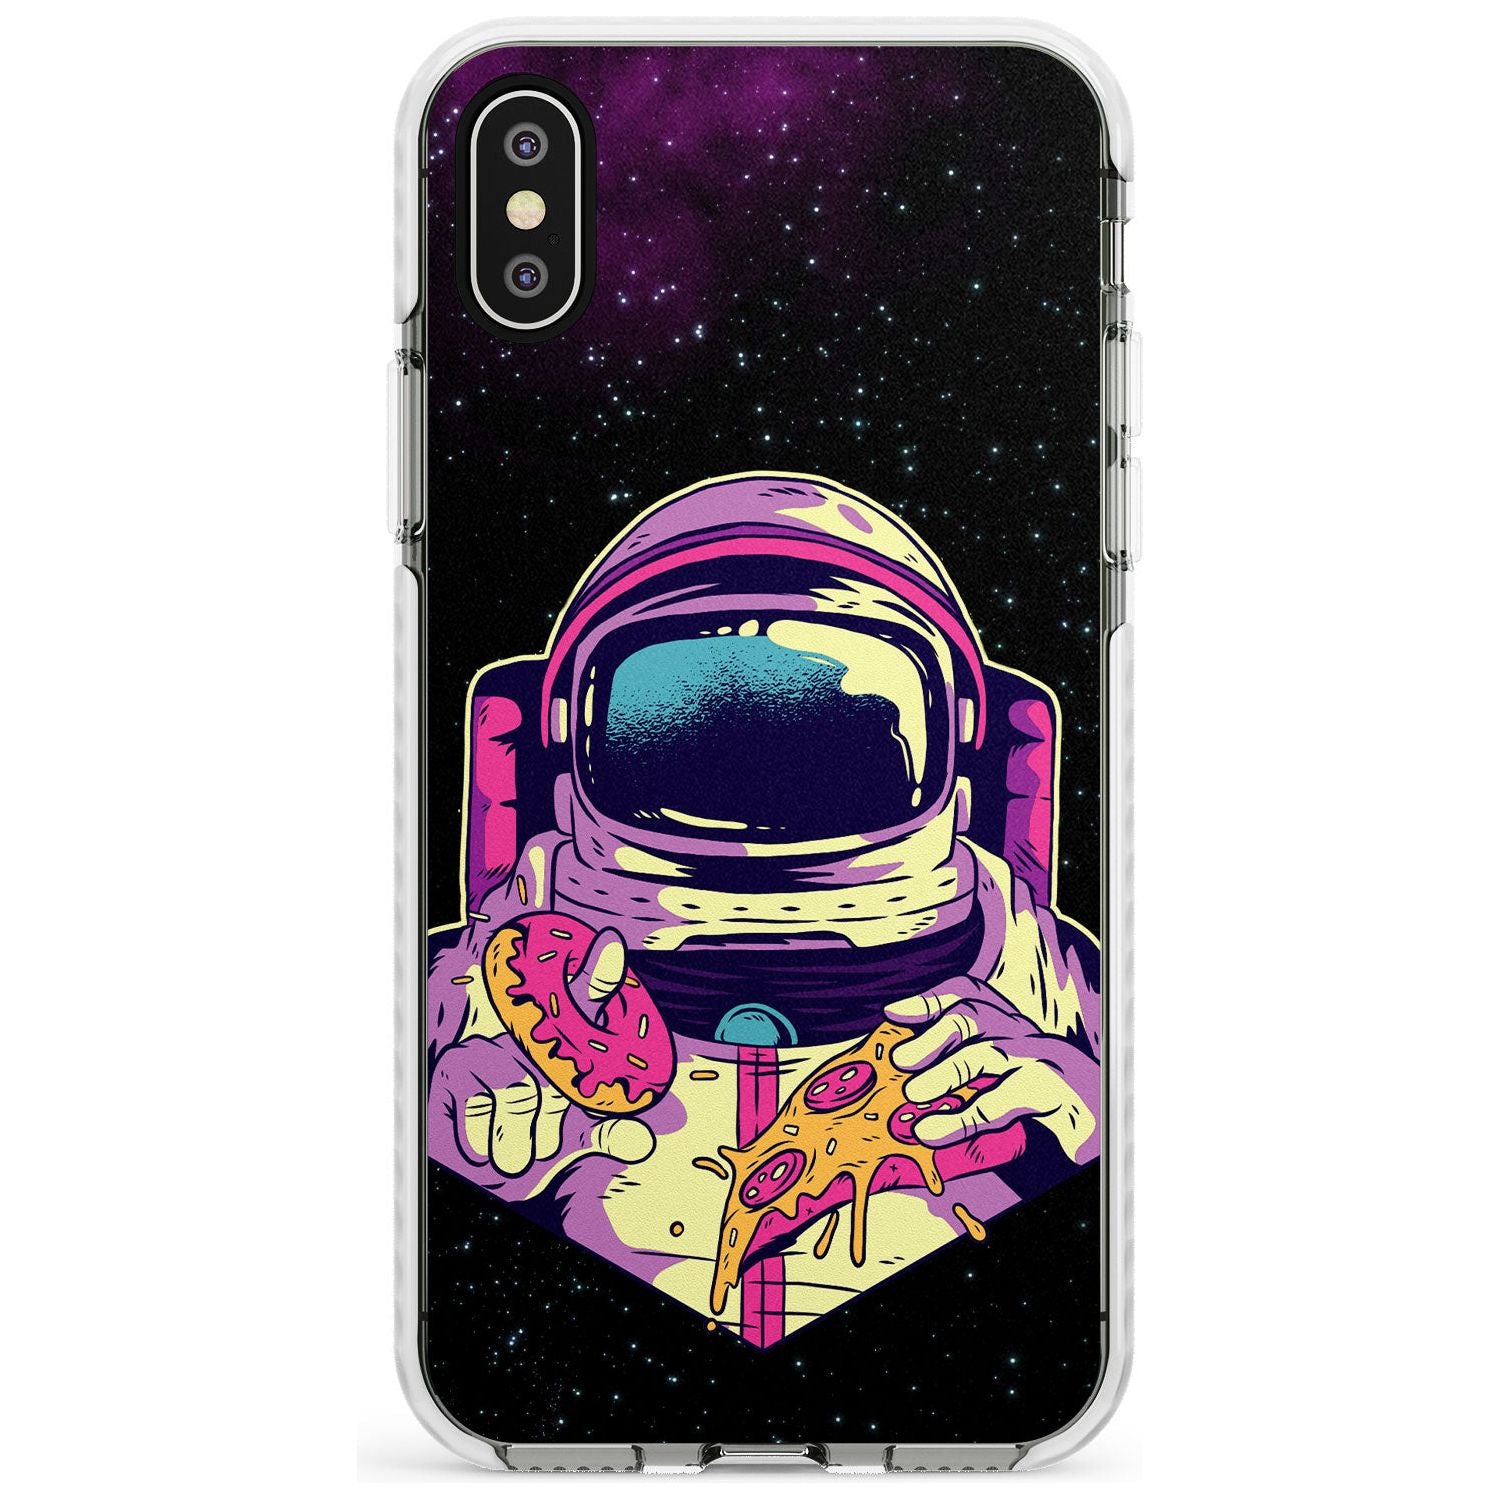 Astro Cheat Meal Impact Phone Case for iPhone X XS Max XR